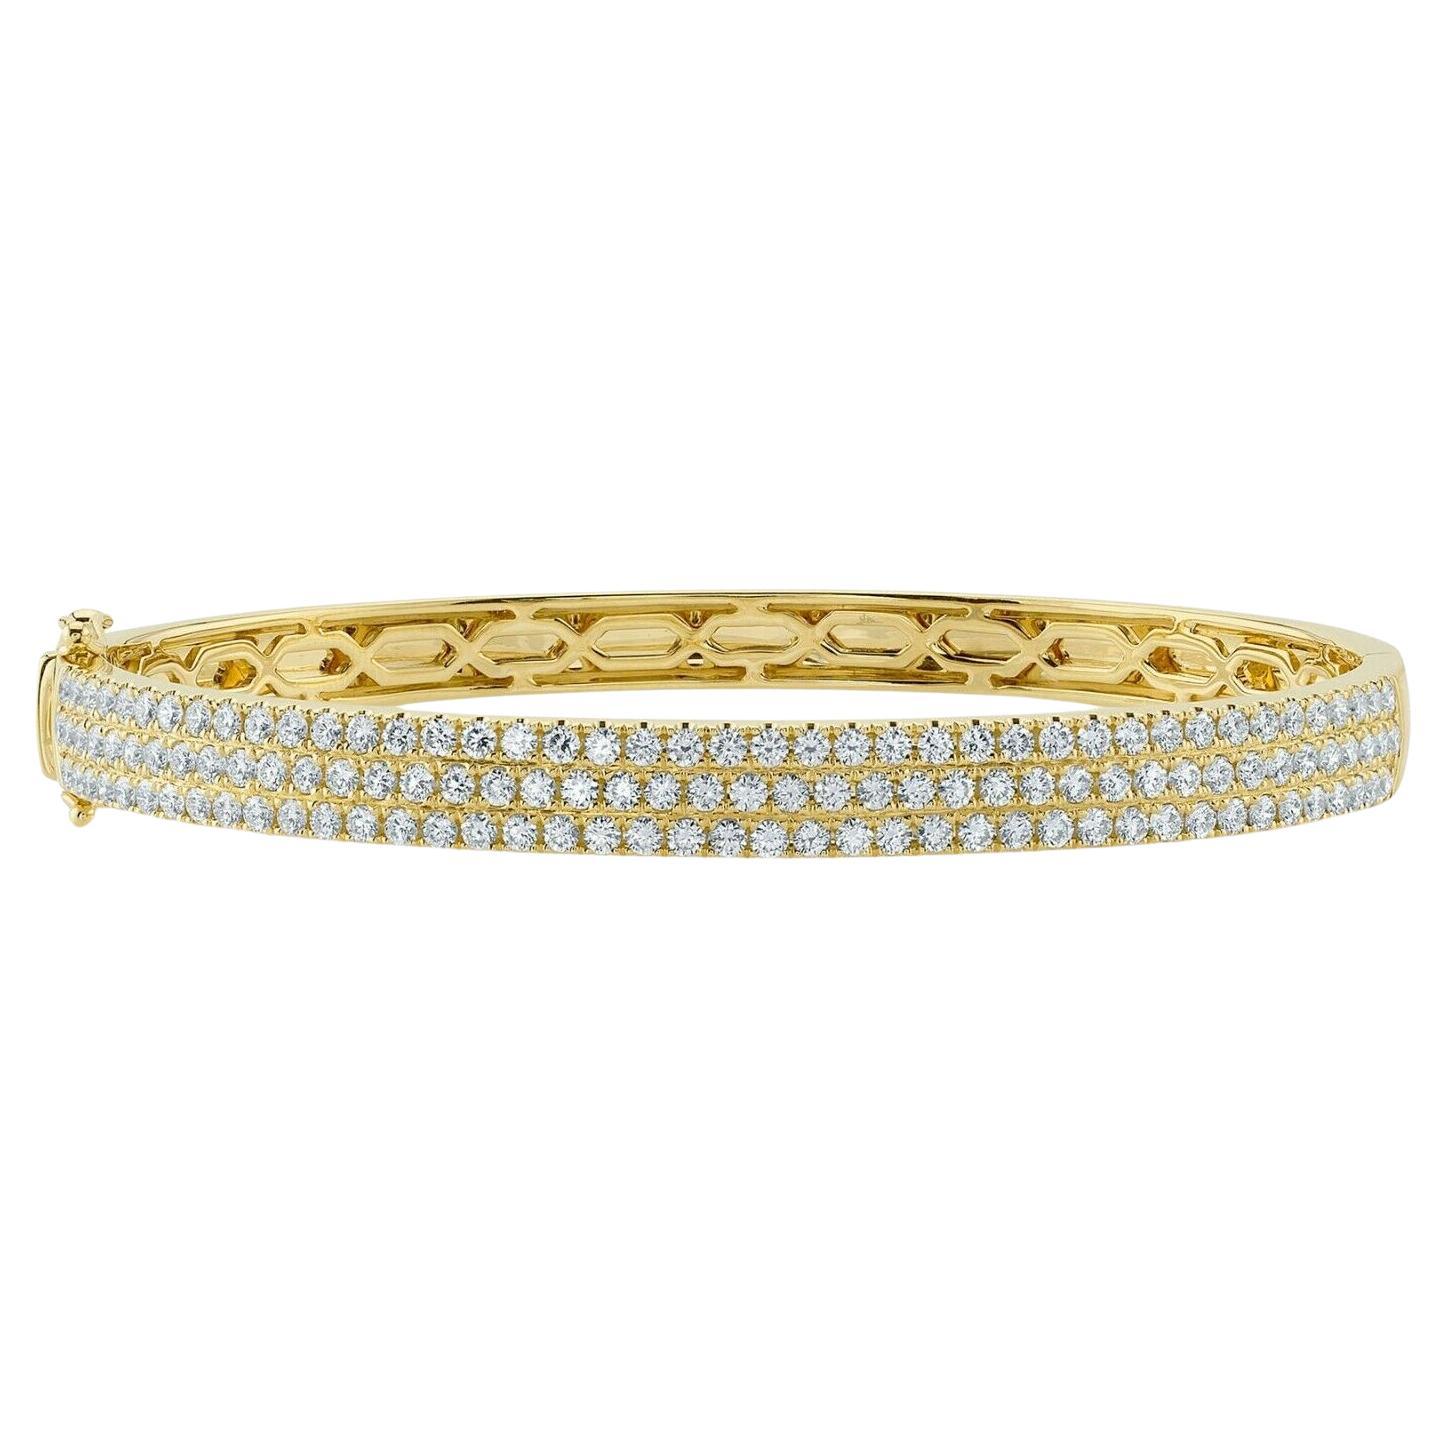 Wide Pave Diamond 2.35 Total Carat Weight Yellow Gold Bangle Bracelet For Sale